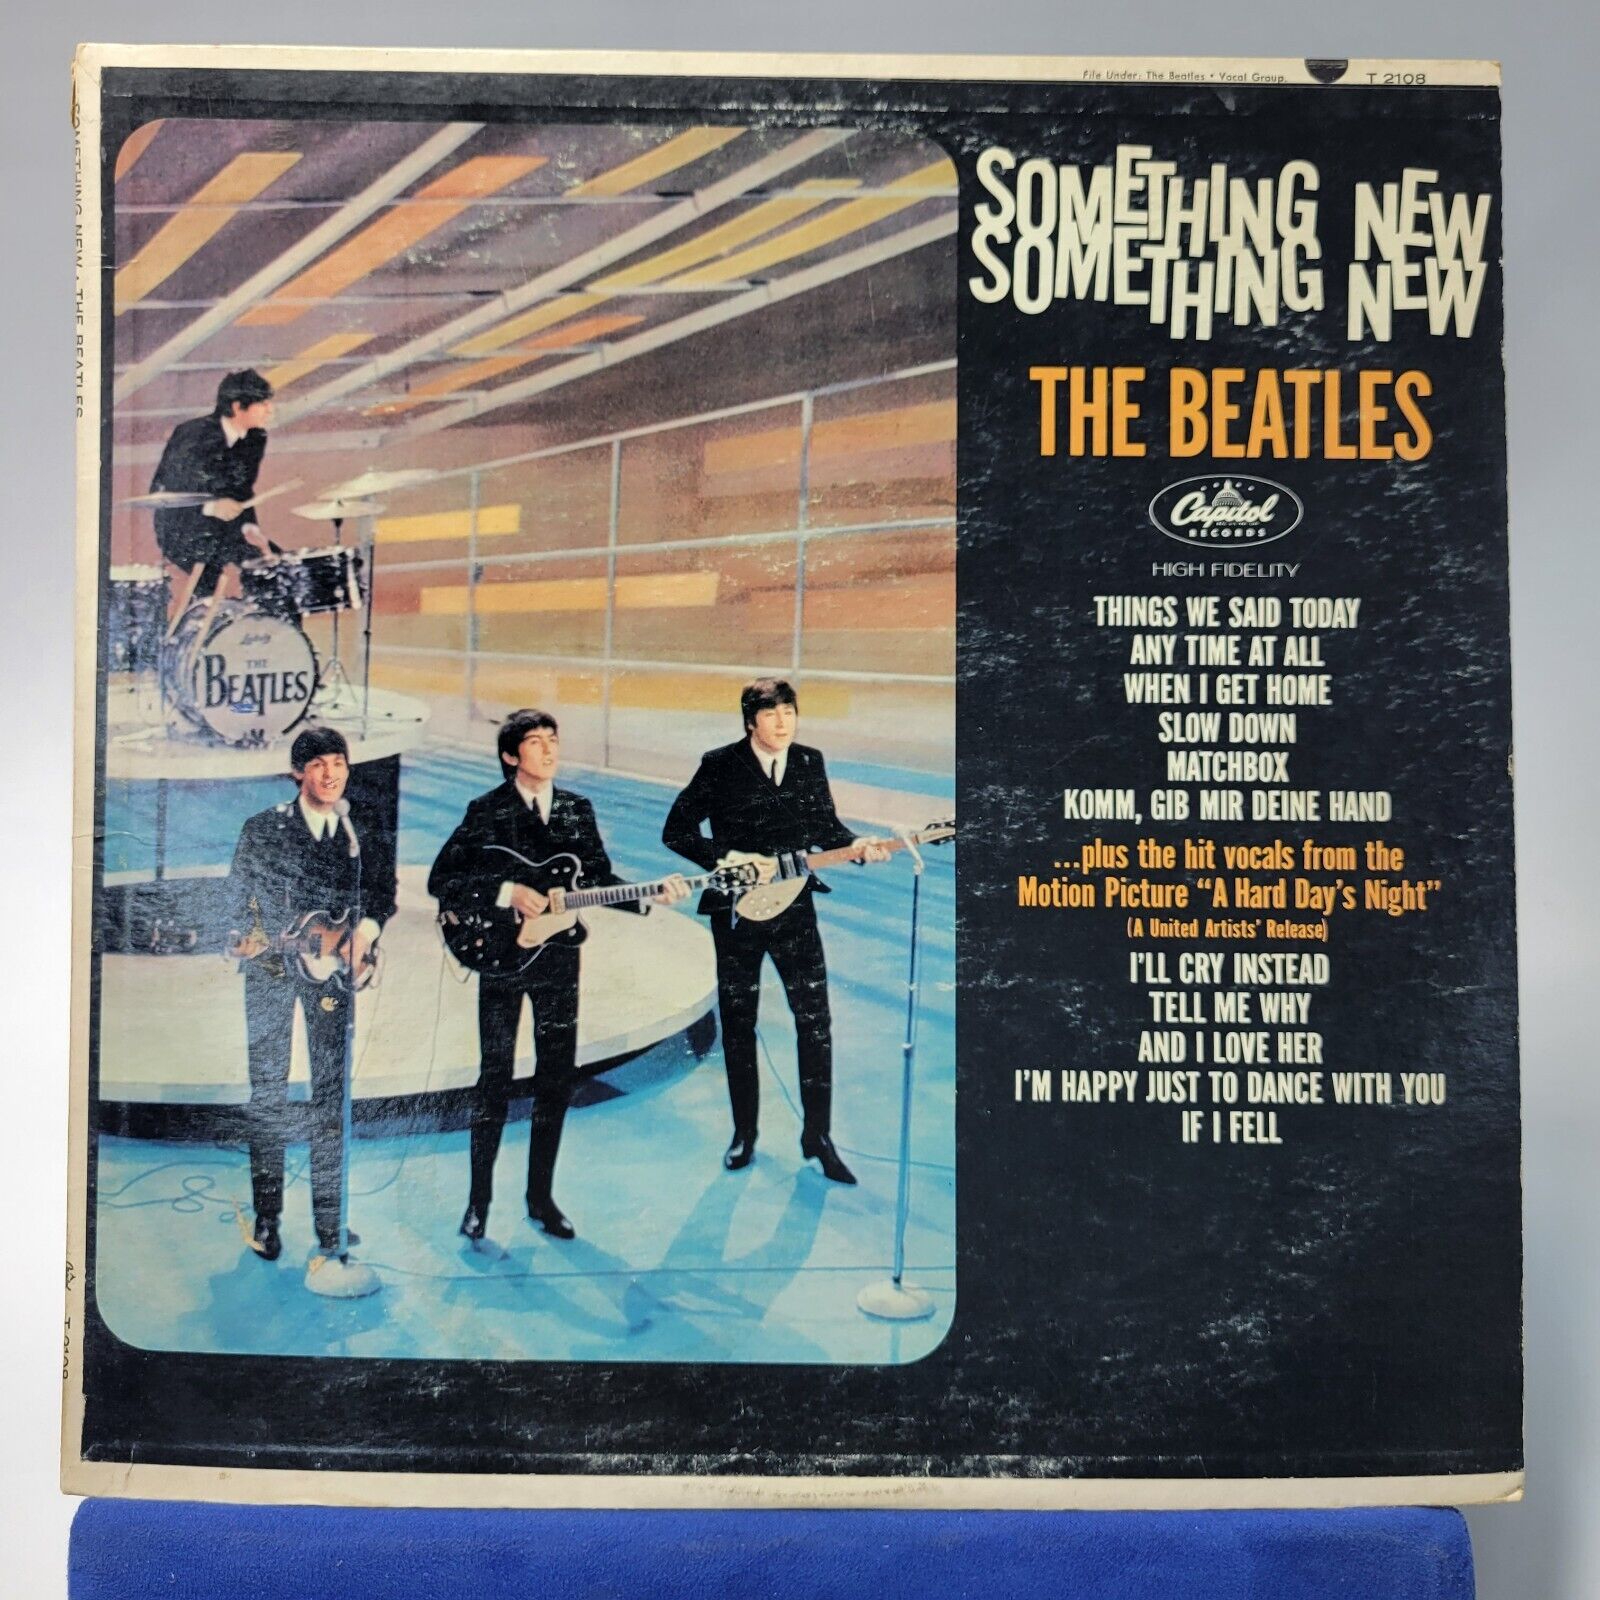 The Beatles ‎~ Something New ~ Vintage LP  Vinyl Capitol Records T-2108